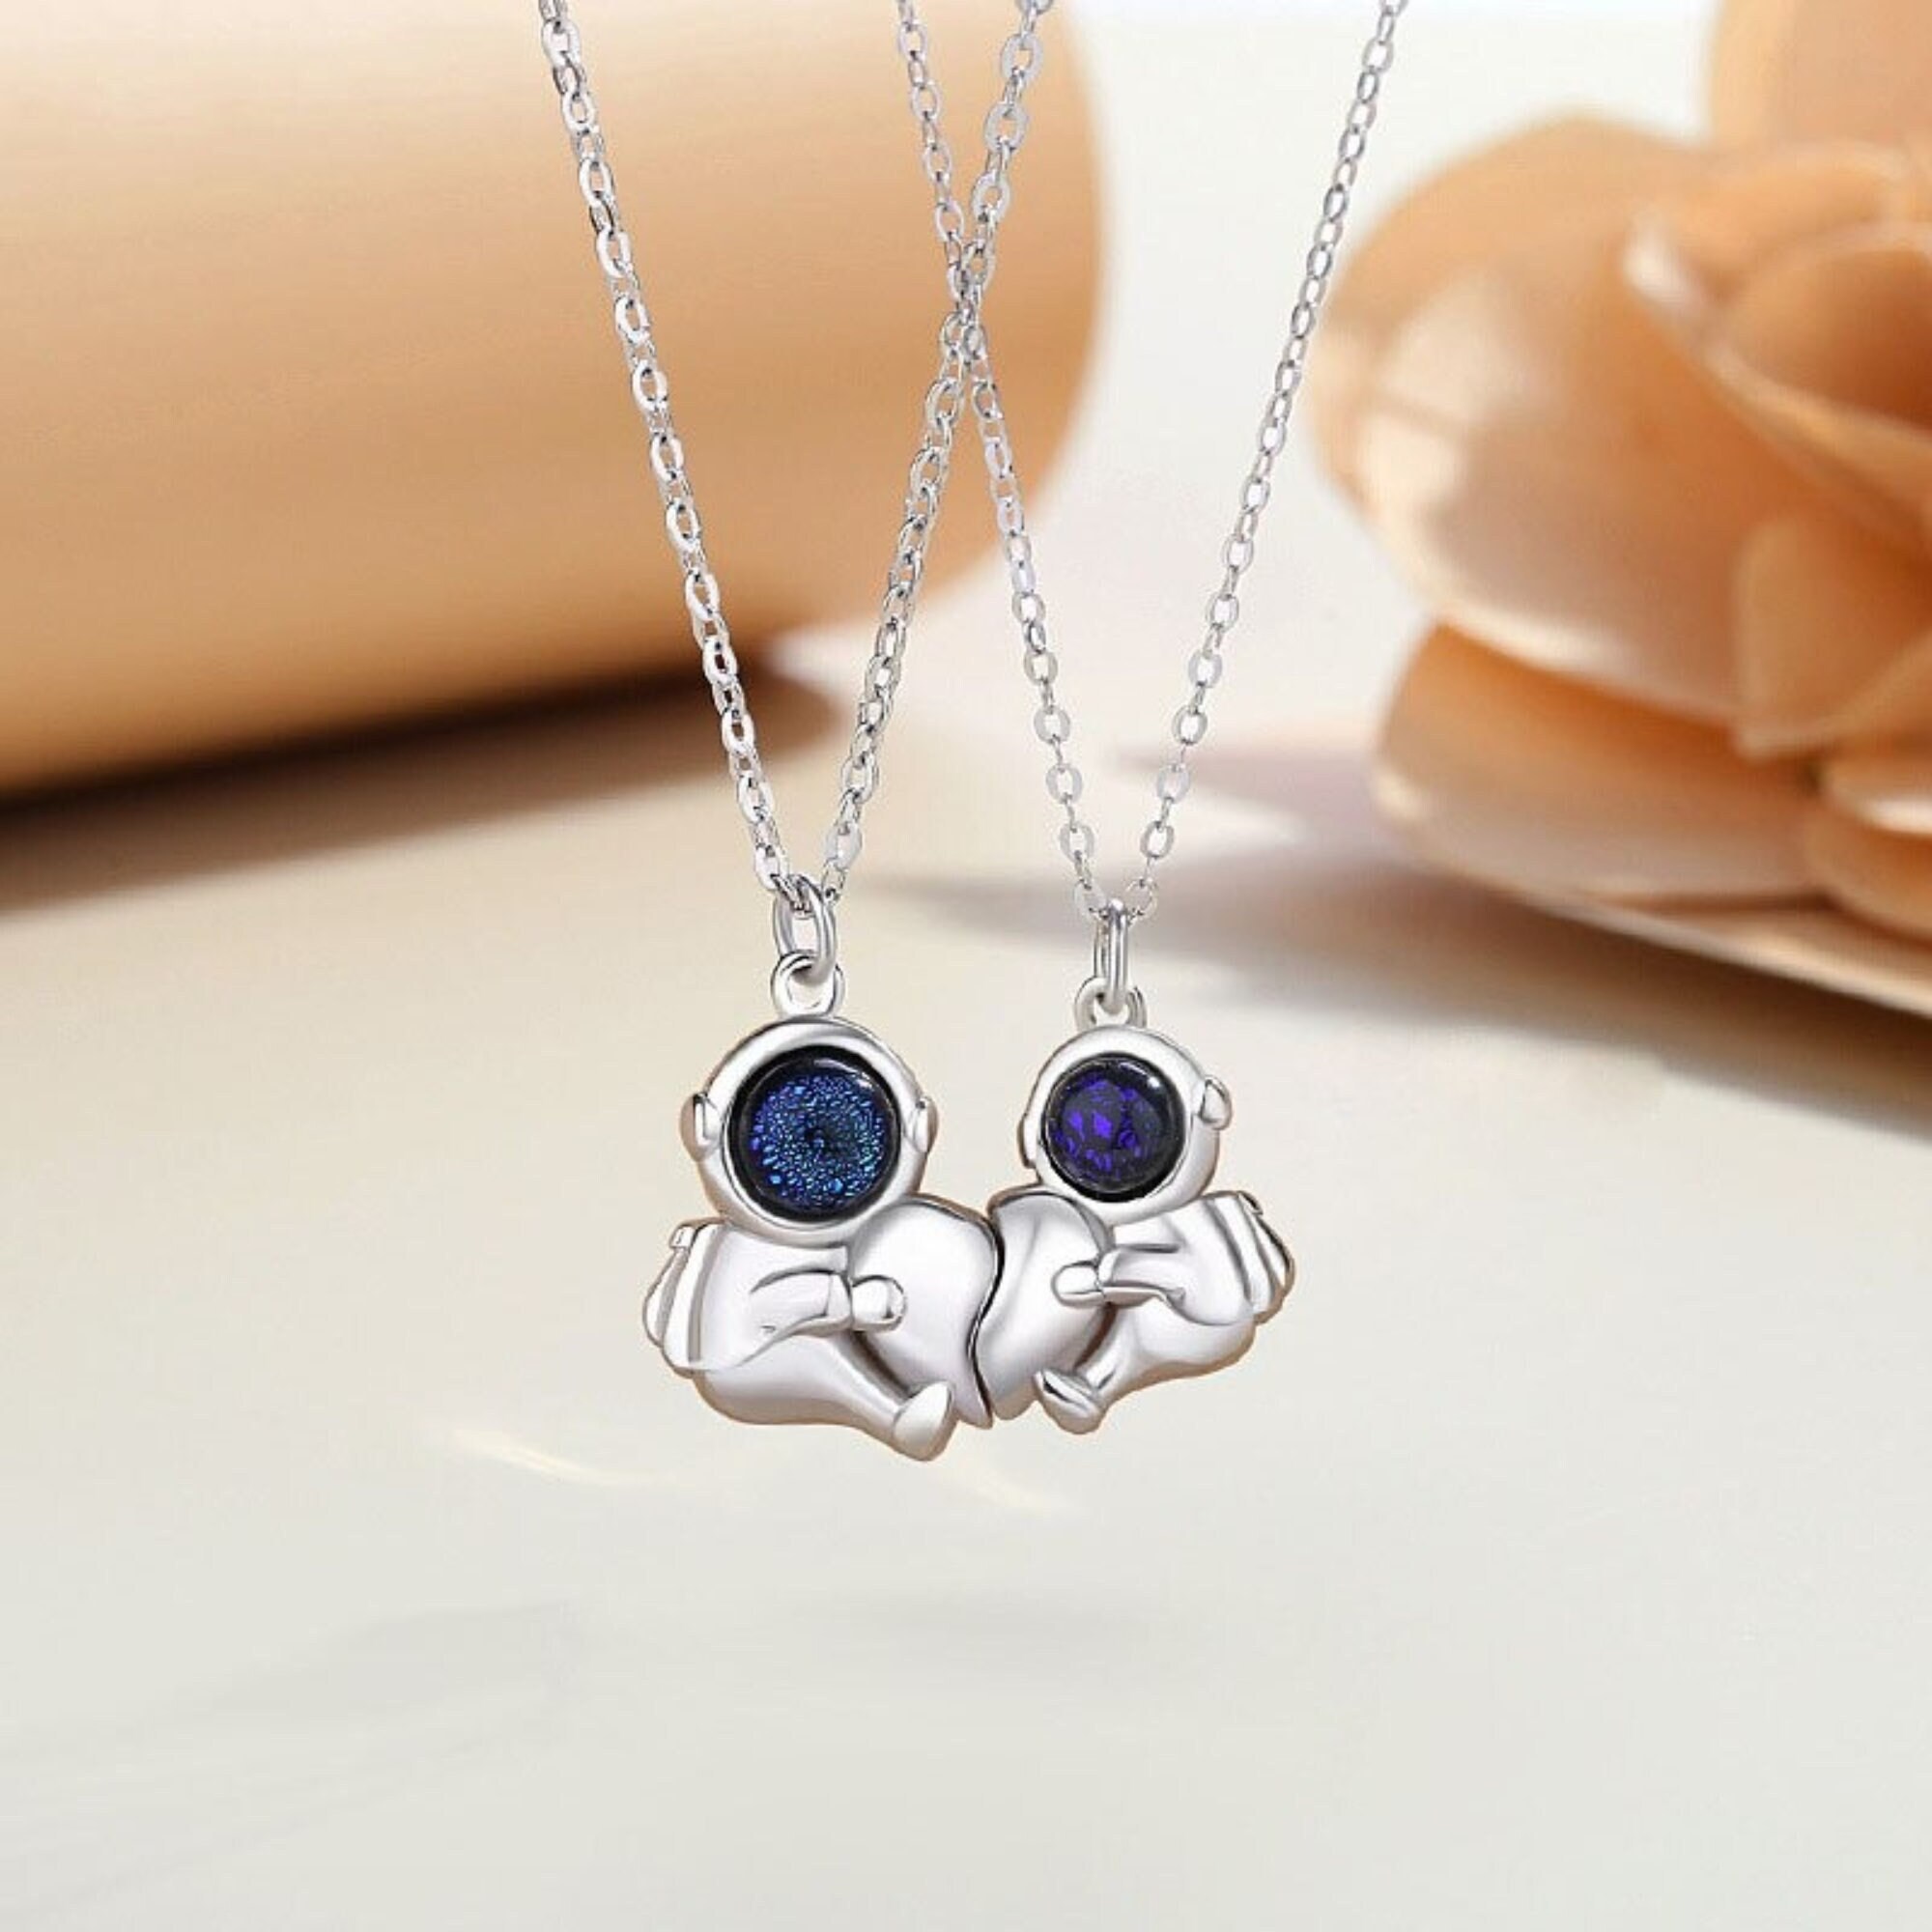 Customized Magnetic Heart Matching Coupe Necklace – couplesnecklaces